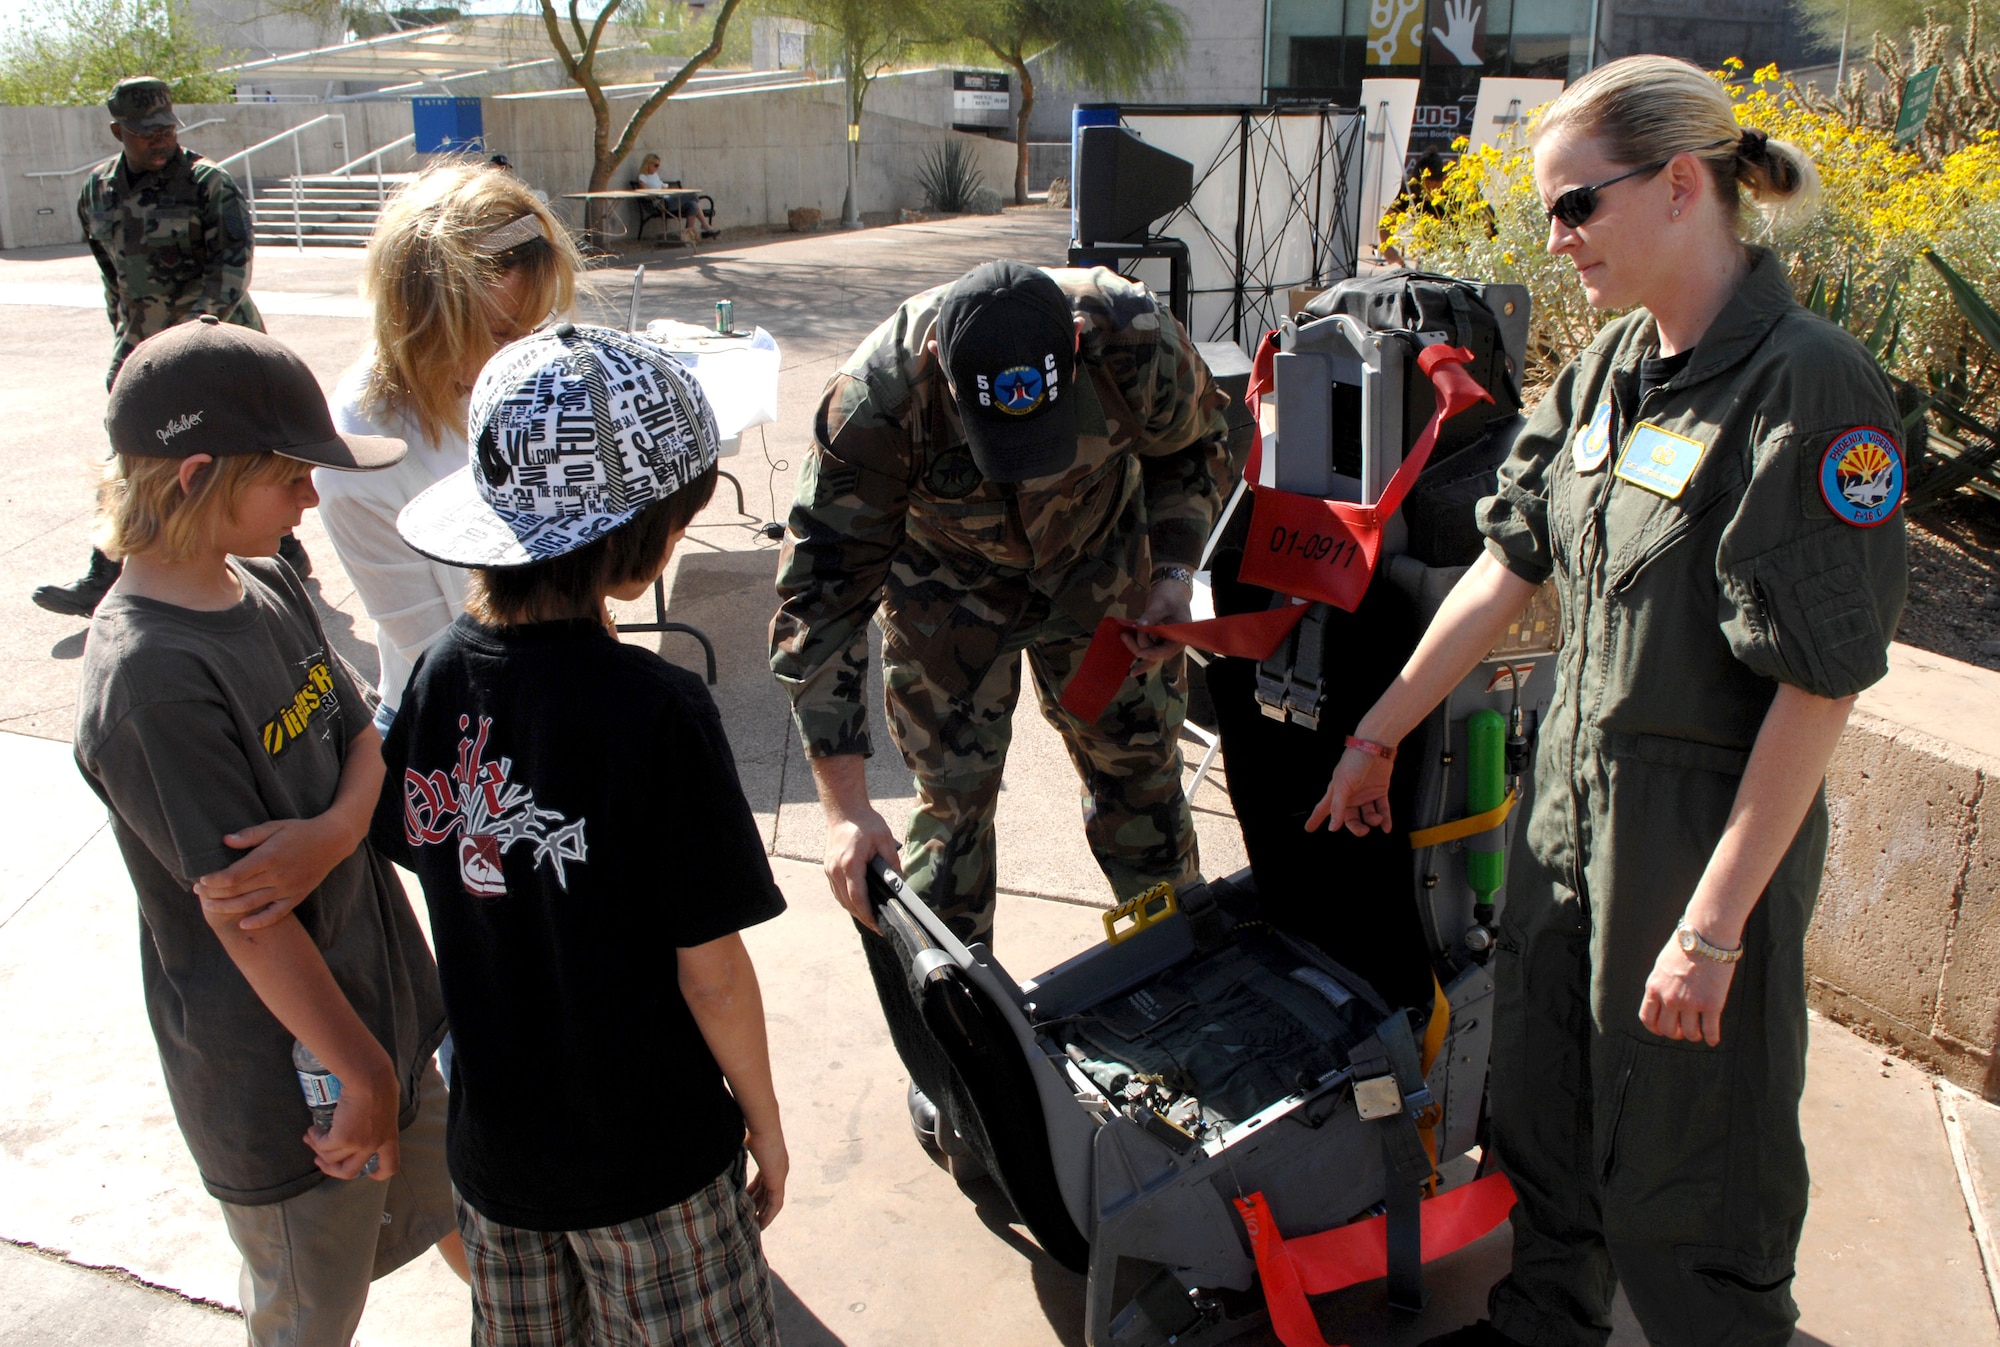 Senior Airman Rex Hicks (left) and Tech. Sgt. Erin Buchanan demonstrate an ejection seat outside the Arizona Science Center in downtown Phoenix during Air Force Week.  Sergeant Buchanan is with the 302nd Fighter Squadron and Airman Hicks is with the 56th Component Maintenance Squadron at nearby Luke Air Force Base. (U.S. Air Force photo/Staff Sgt. Brian Ferguson)